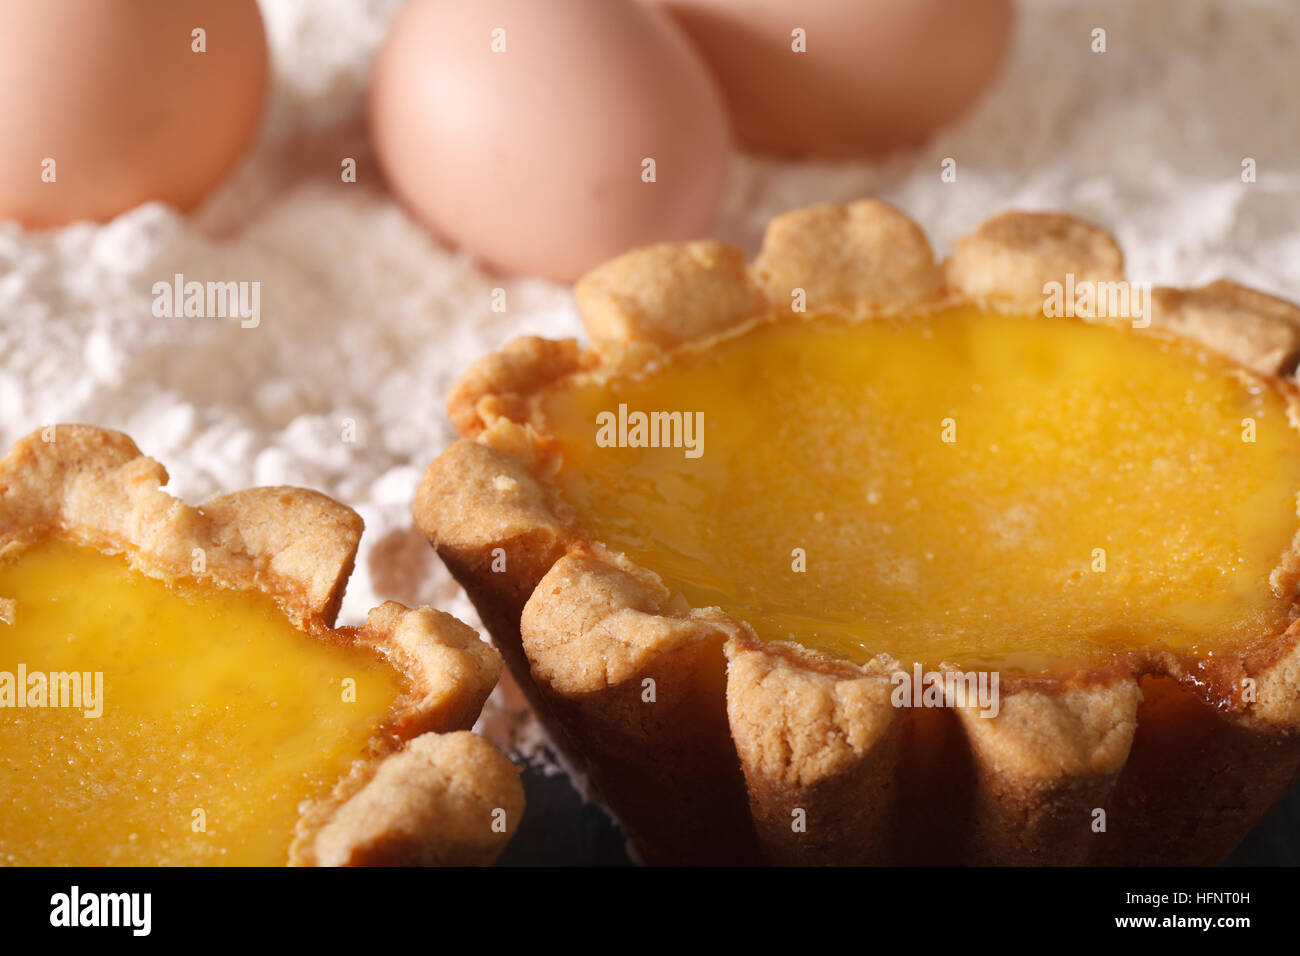 Delicious Egg Tart and ingredients on the table macro. Horizontal Stock Photo